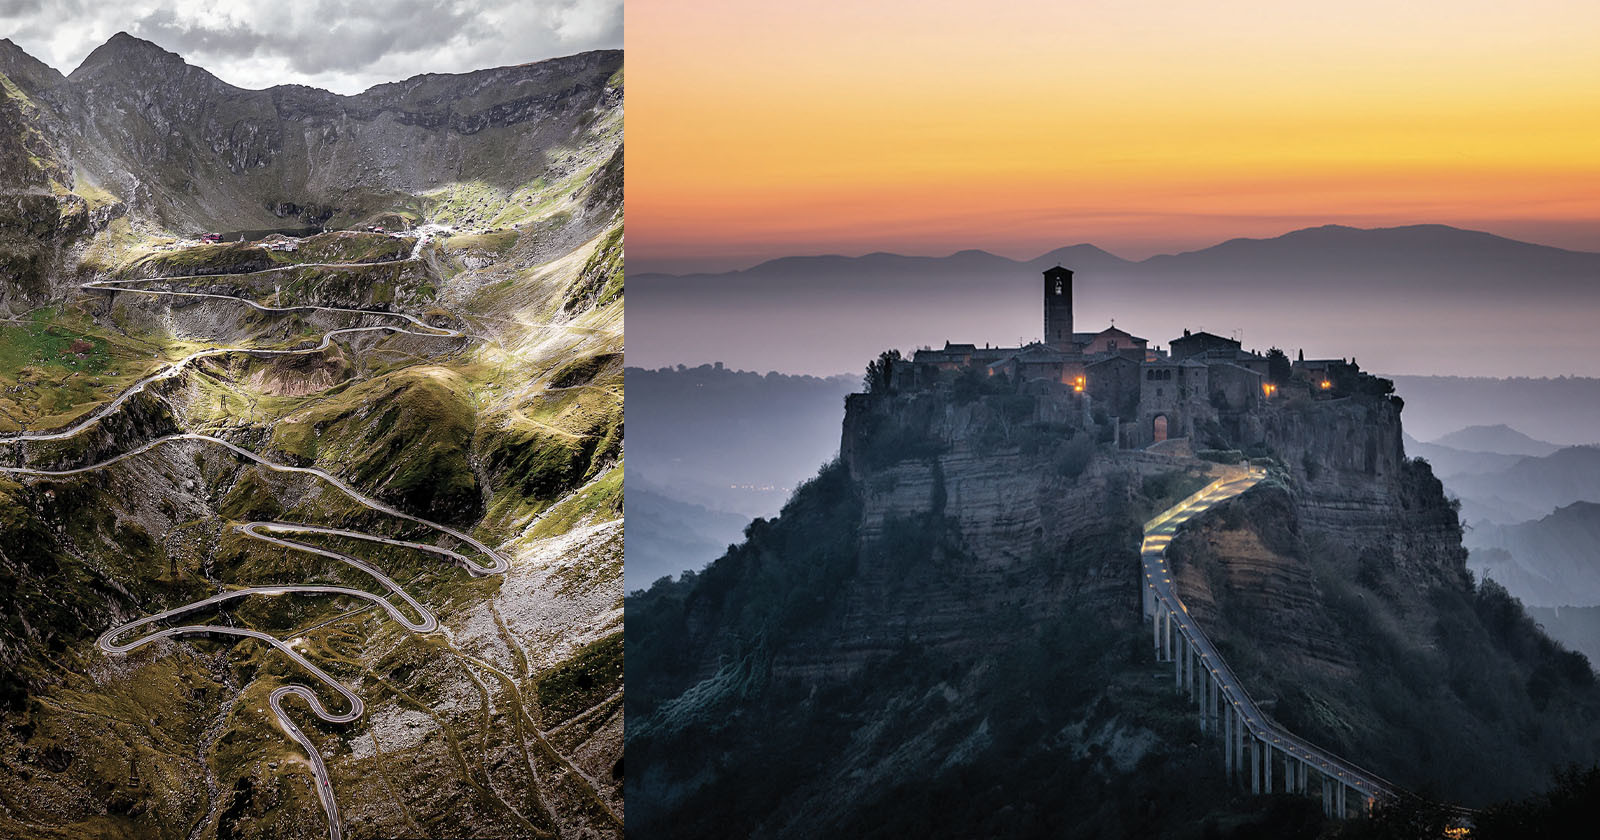 Spectacular Photos Showcase Secret Locations From Around the World